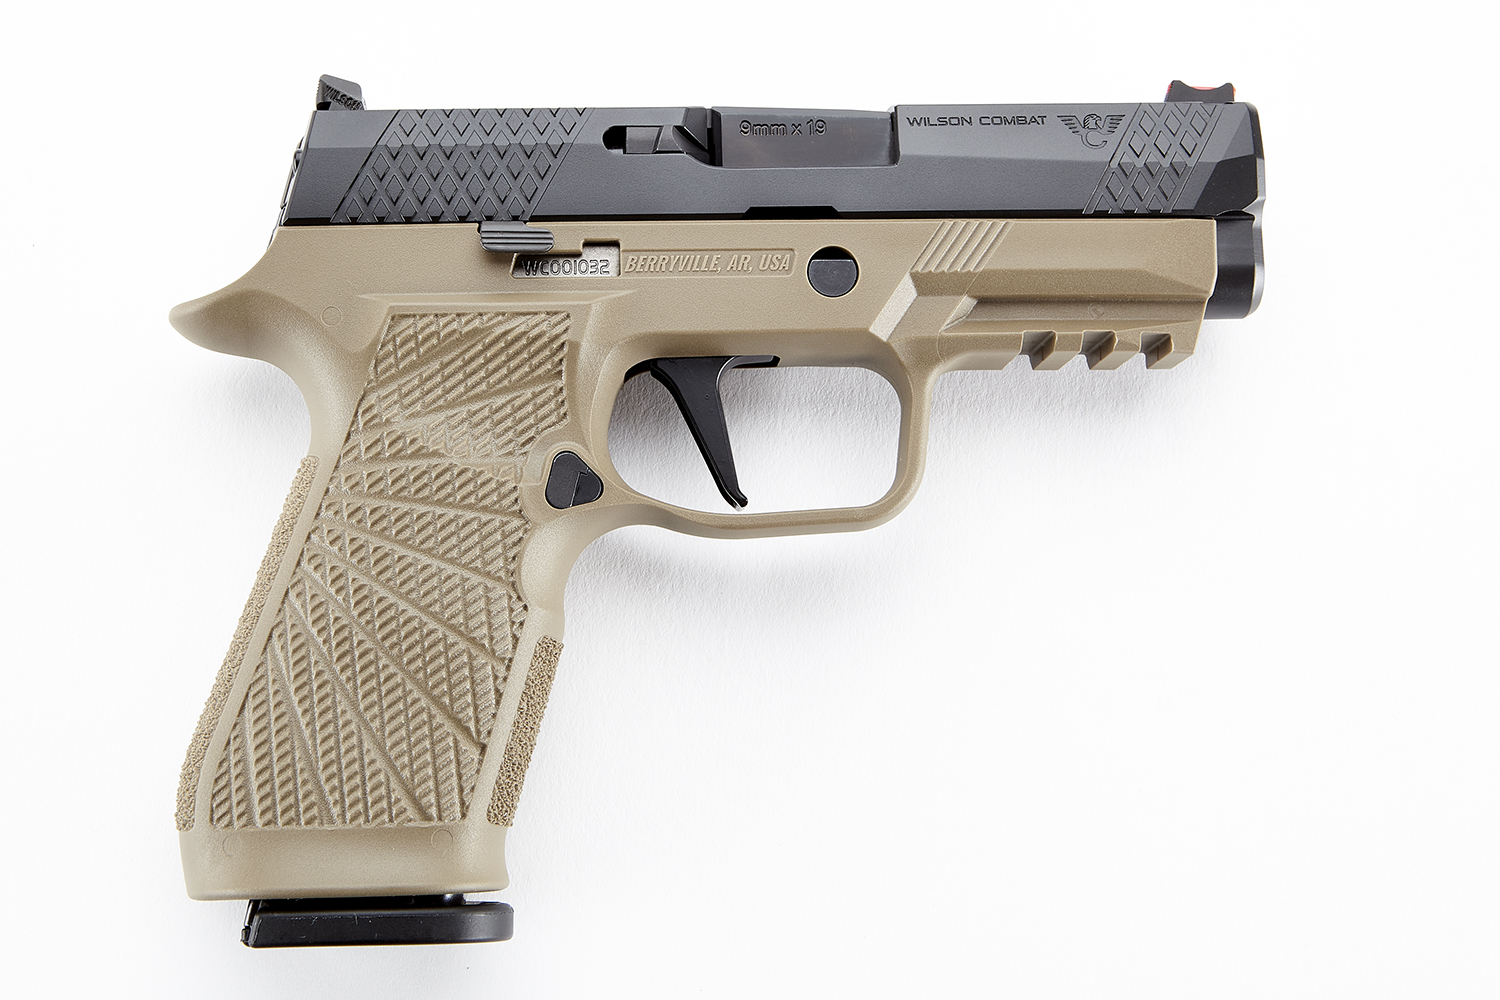 Wilson Combat / Sig Sauer P320, Carry, 9mm, Action Tune with Straight Trigger - Tan Module